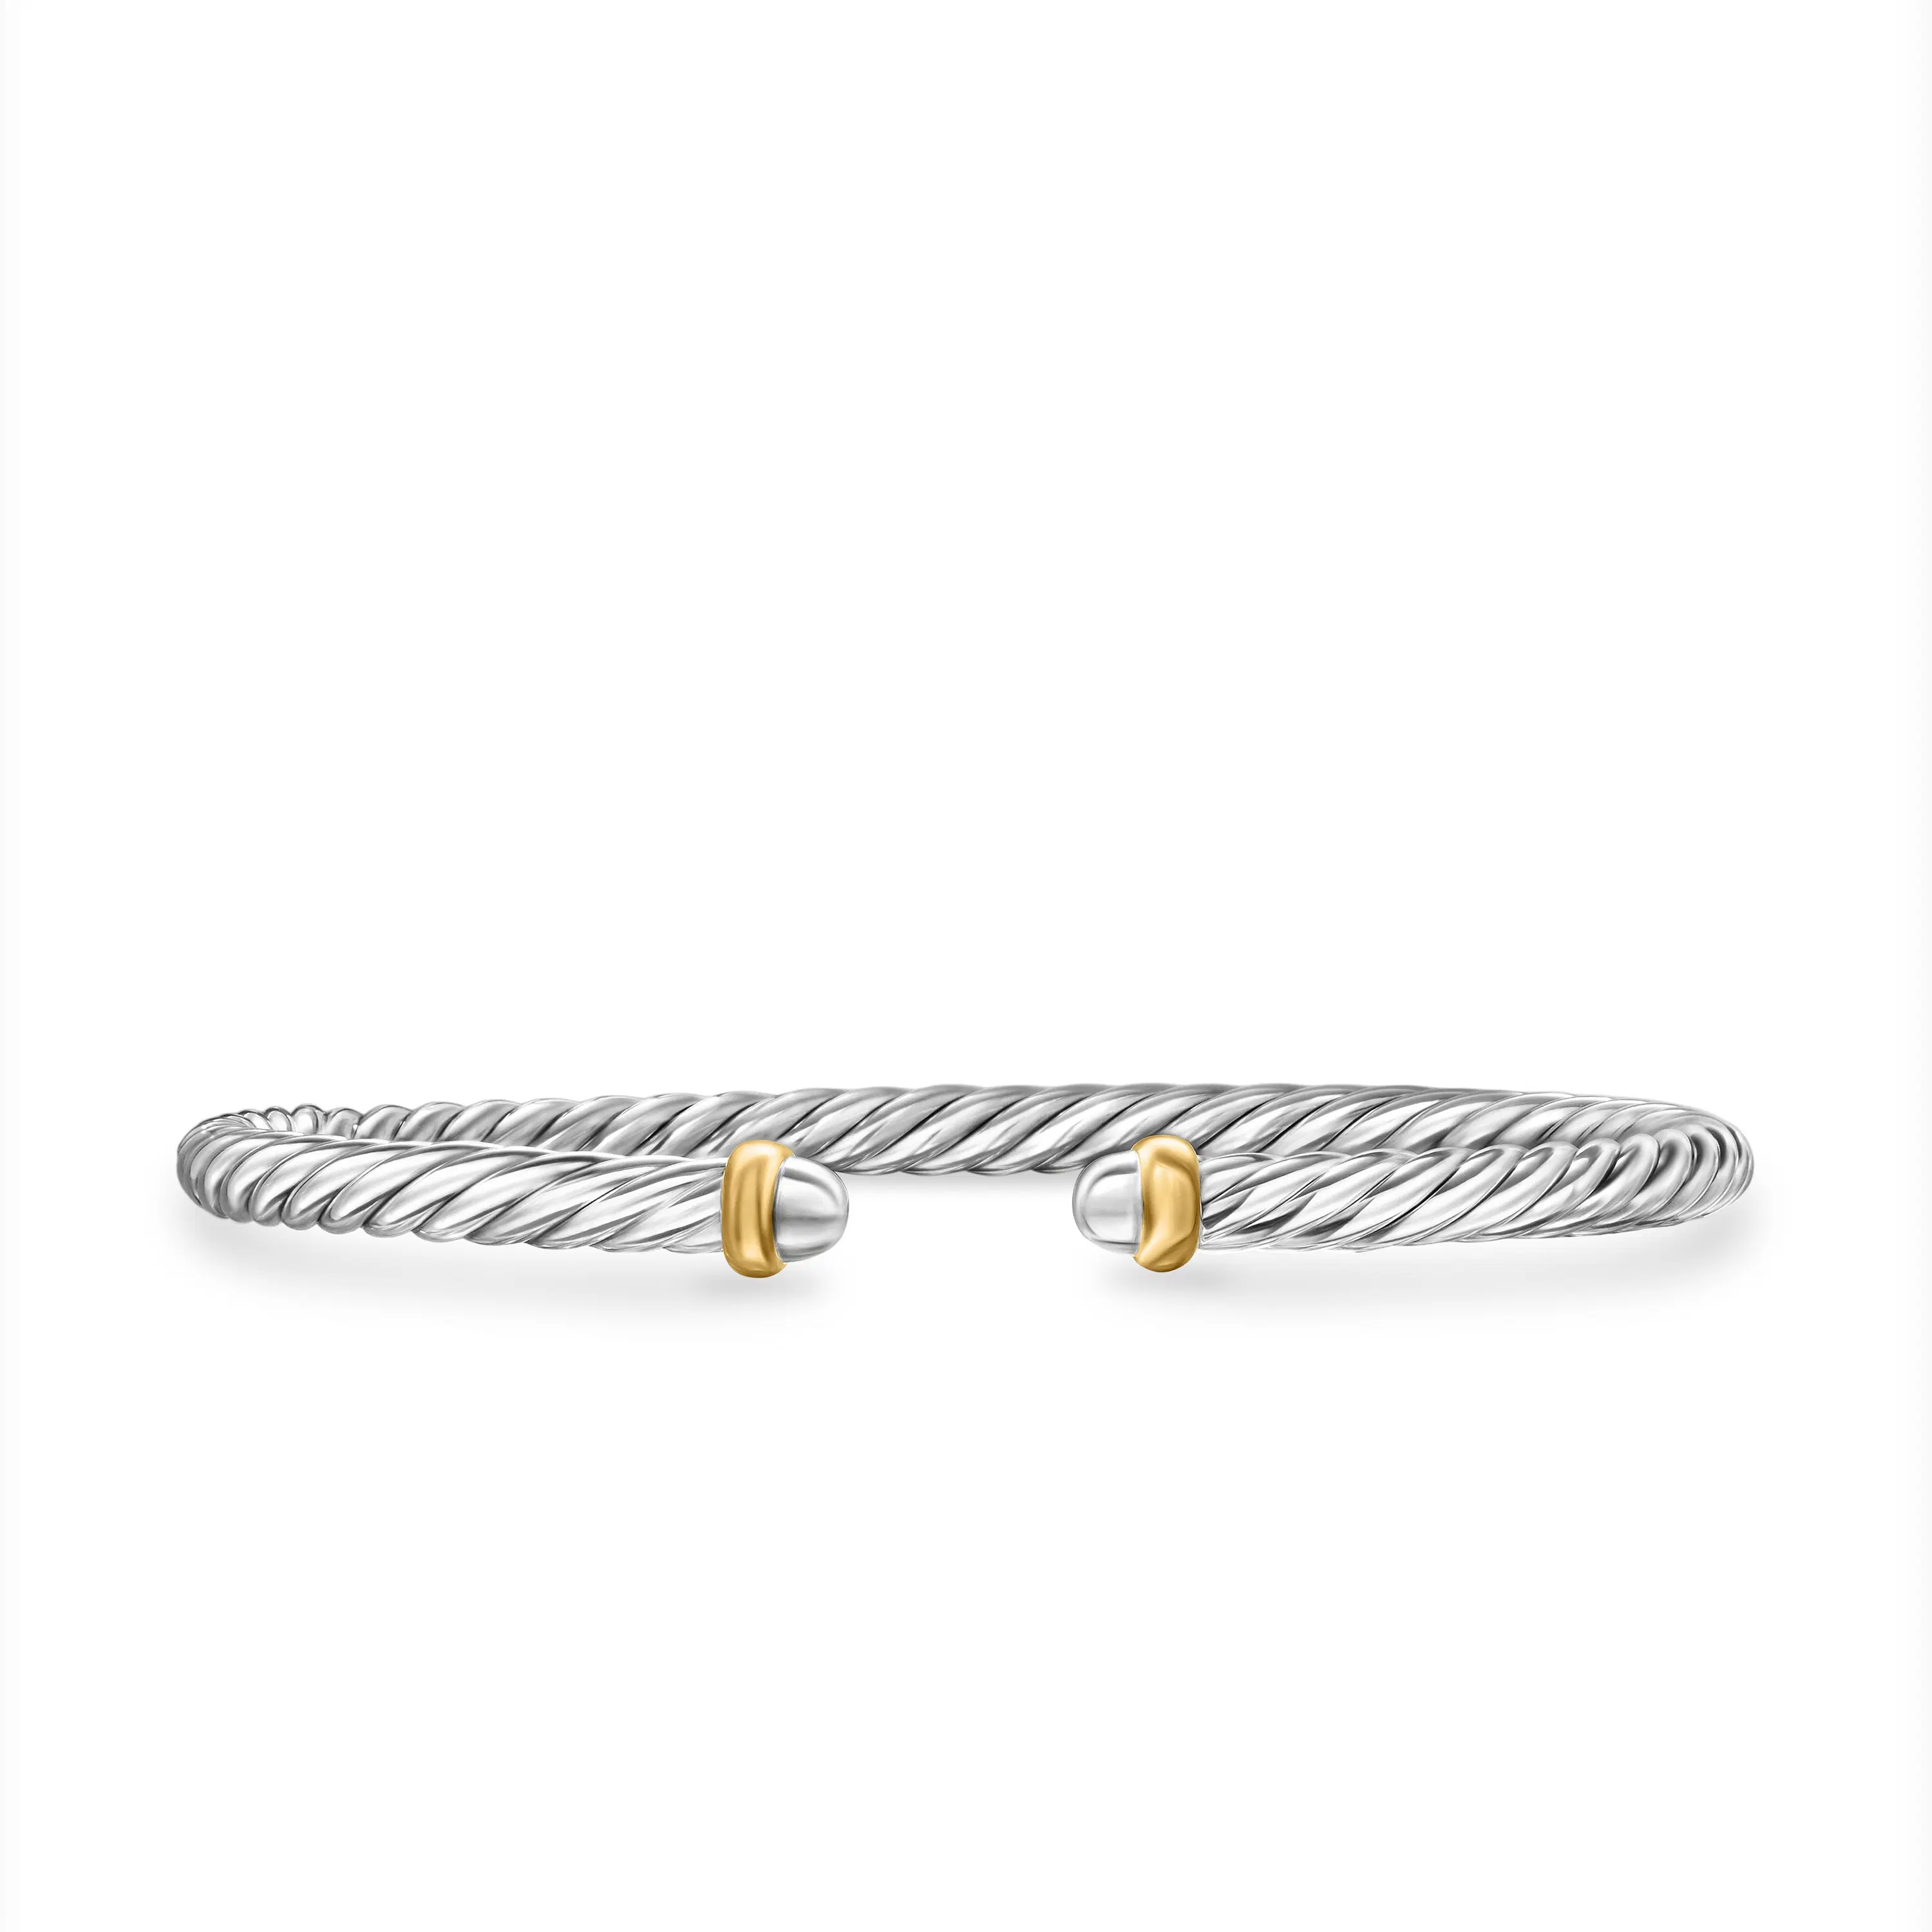 David Yurman Sterling Silver Cable Flex Bracelet with Gold, Size Small 0